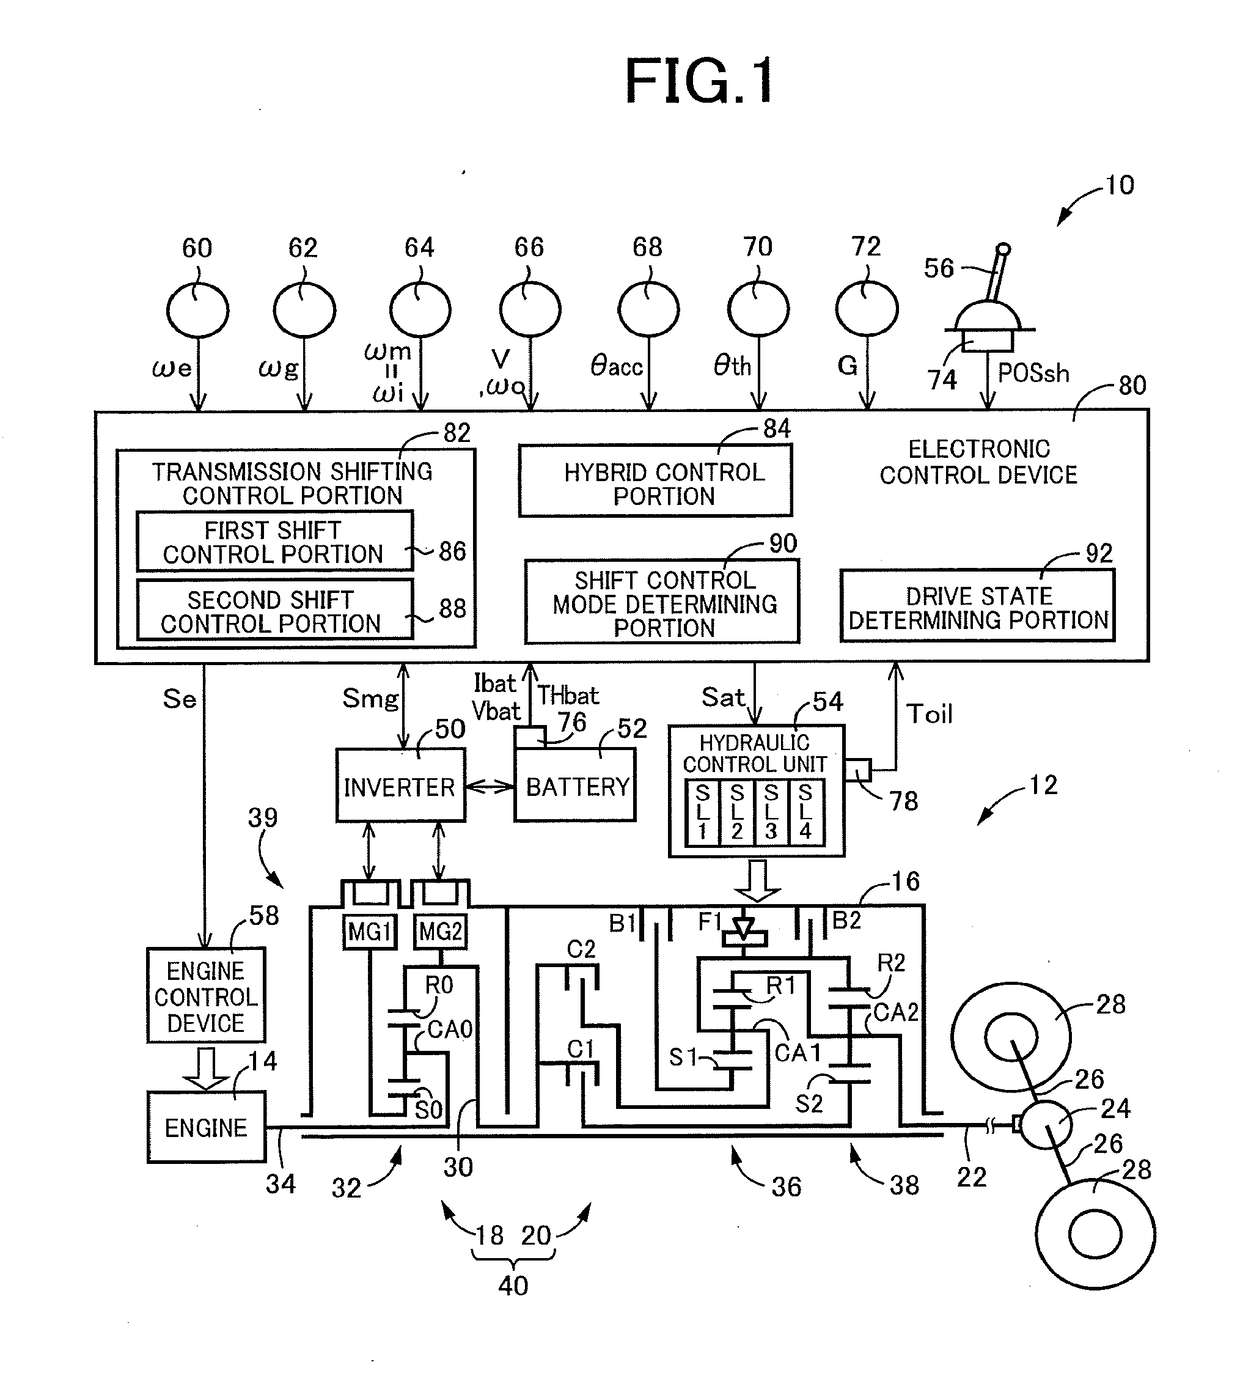 Shift control apparatus for vehicle